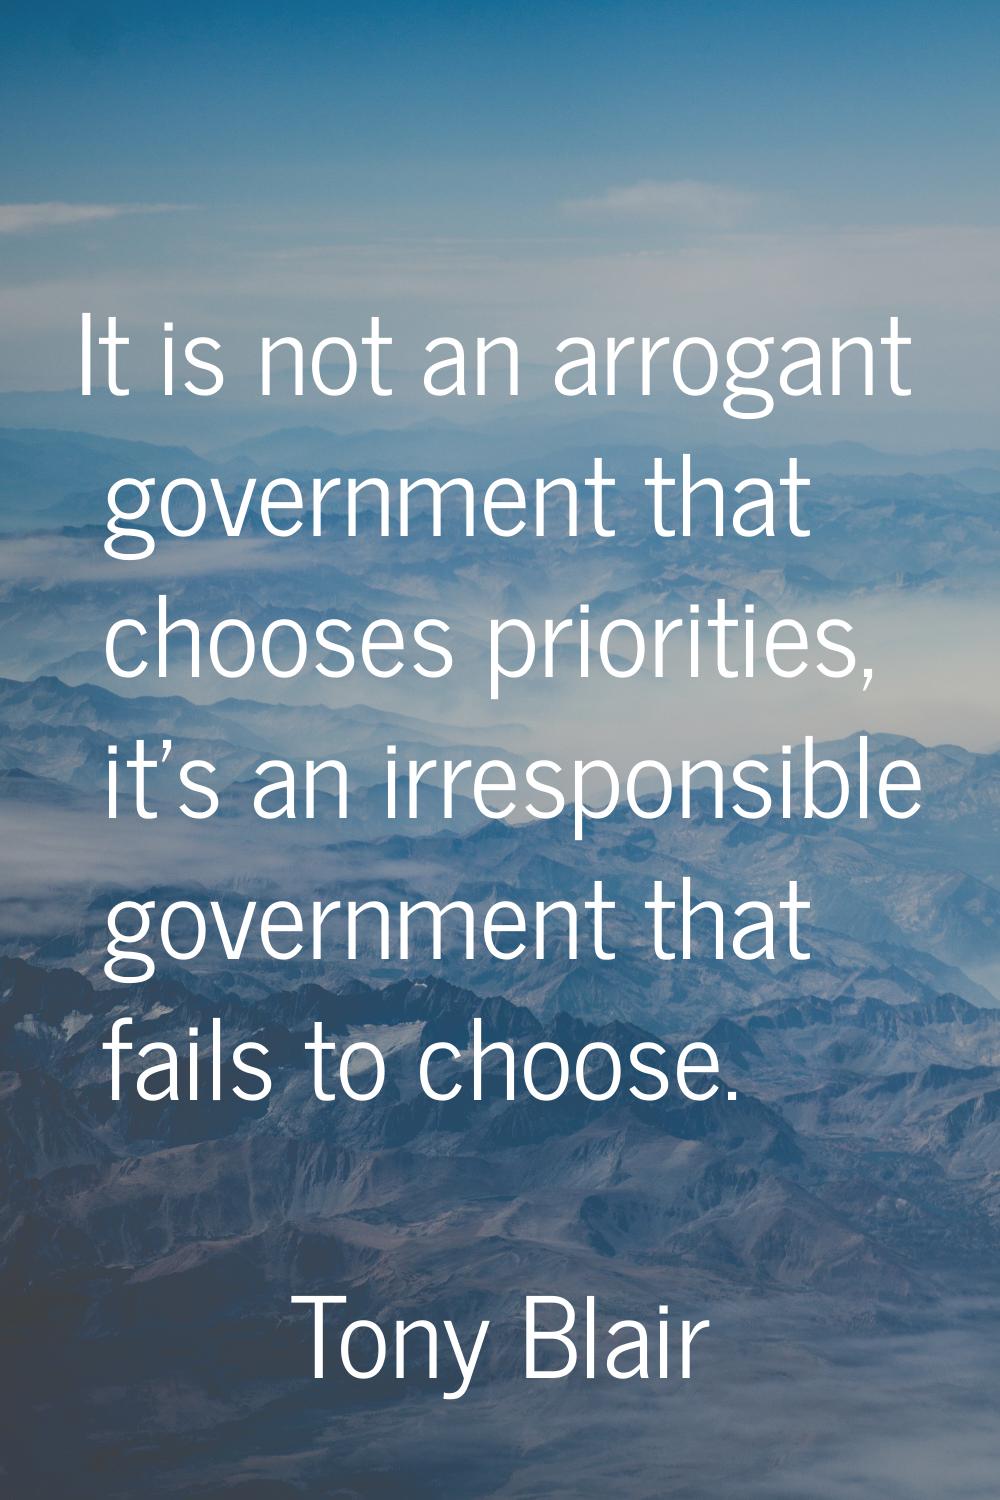 It is not an arrogant government that chooses priorities, it's an irresponsible government that fai